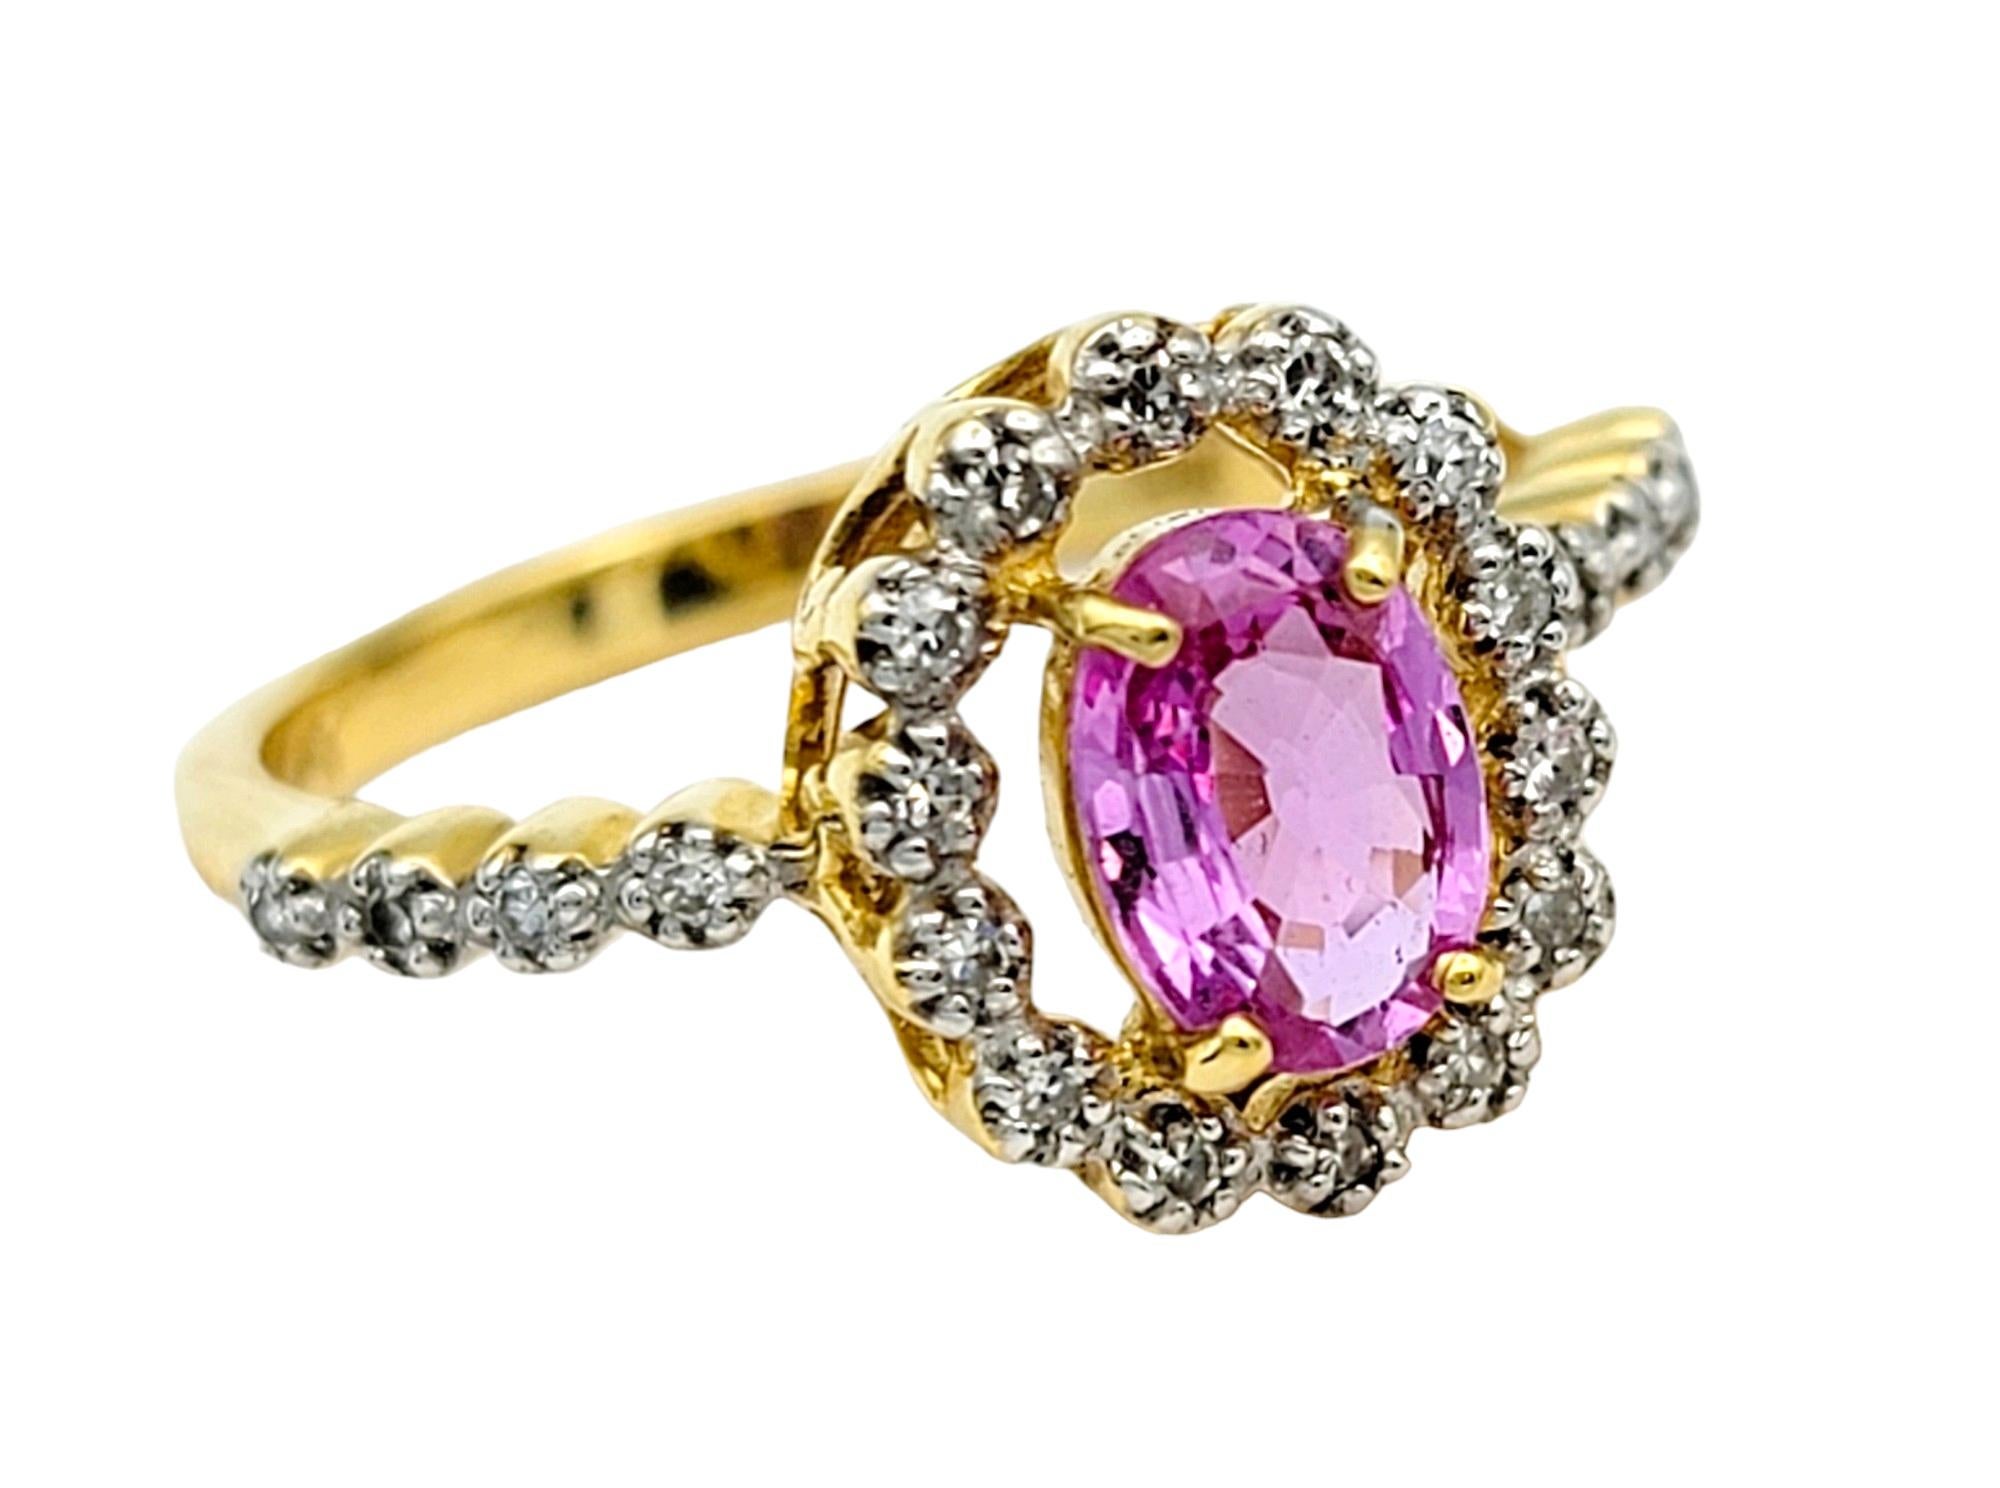 Contemporary Oval Cut Pink Sapphire Ring with Floating Diamond Halo in 18 Karat Yellow Gold  For Sale